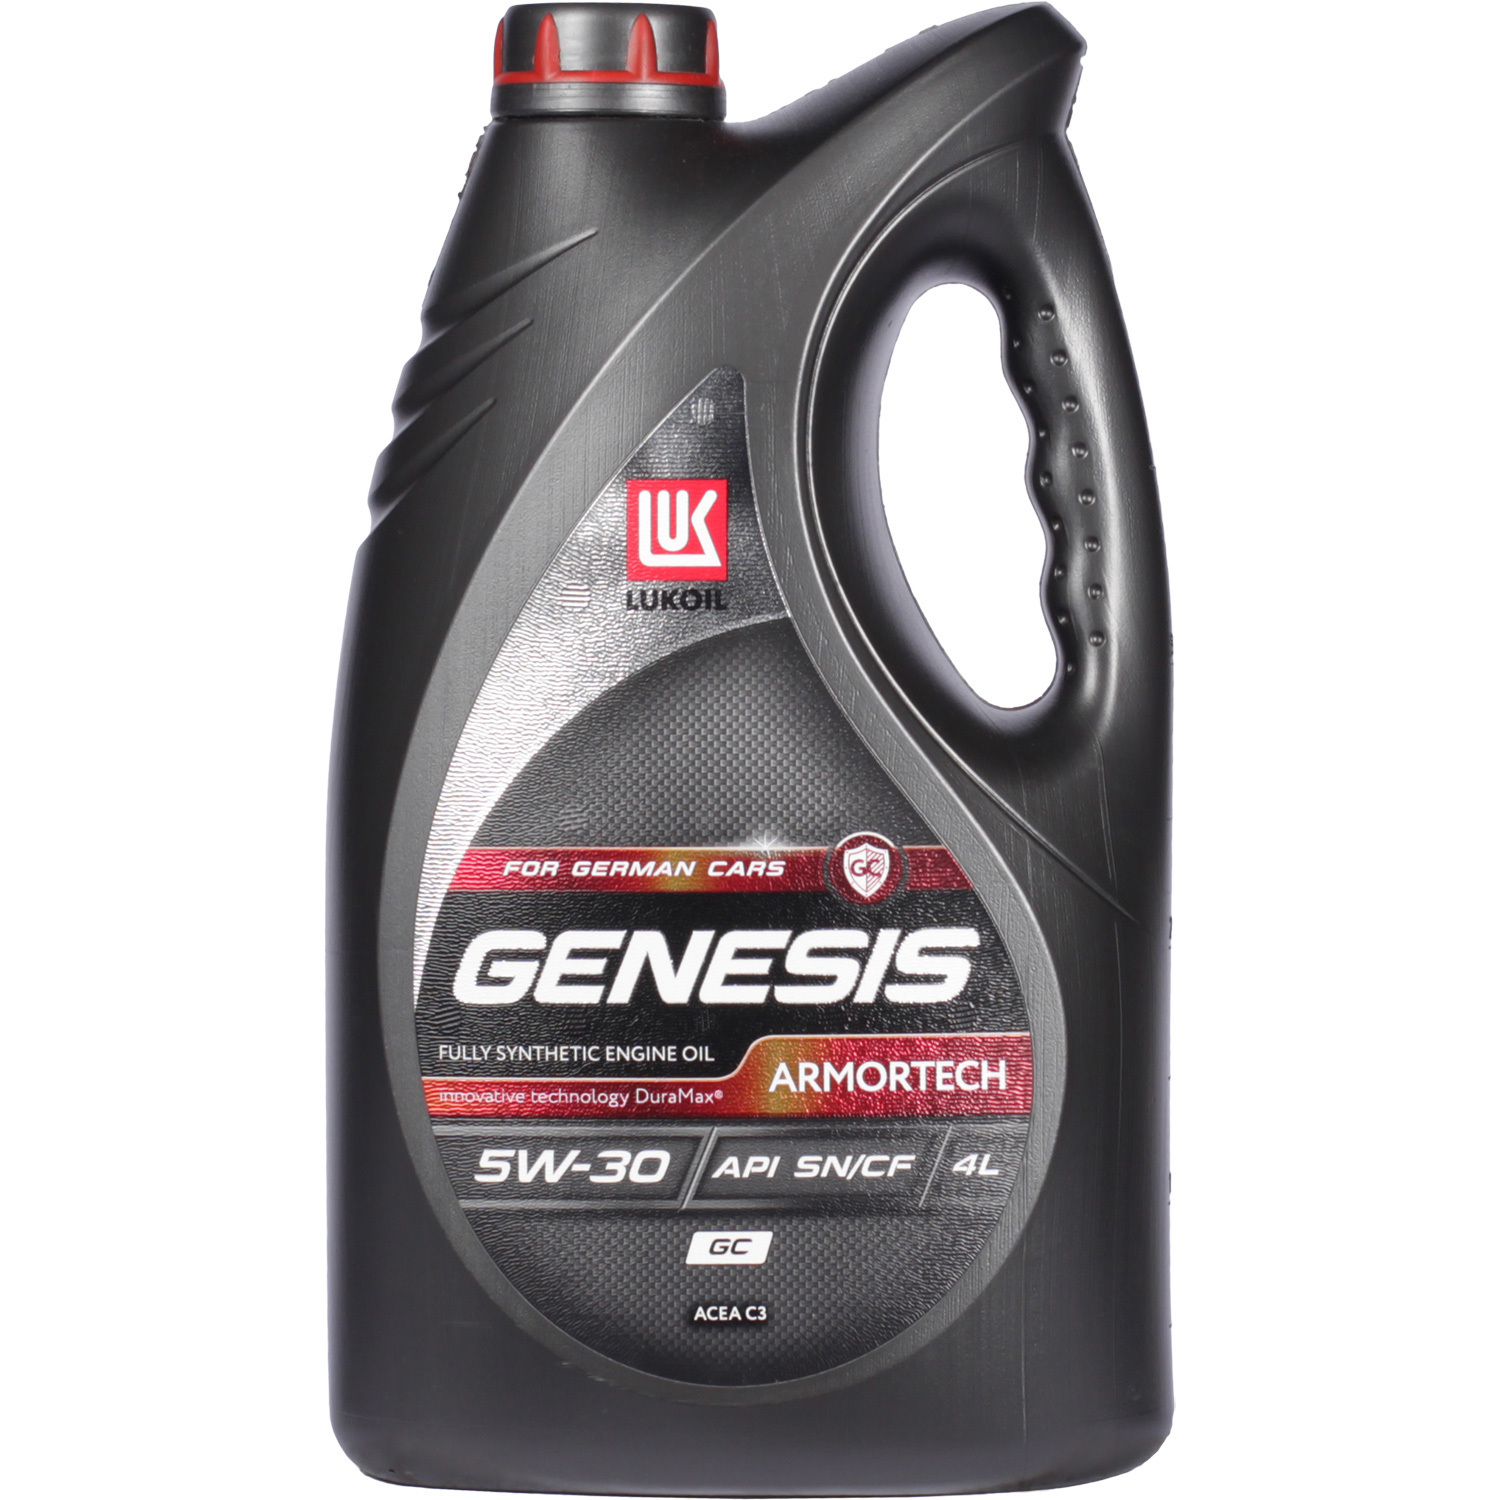 Lukoil Моторное масло Lukoil Genesis Armortech GC 5W-30, 4 л lukoil моторное масло lukoil genesis armortech gc 5w 30 1 л